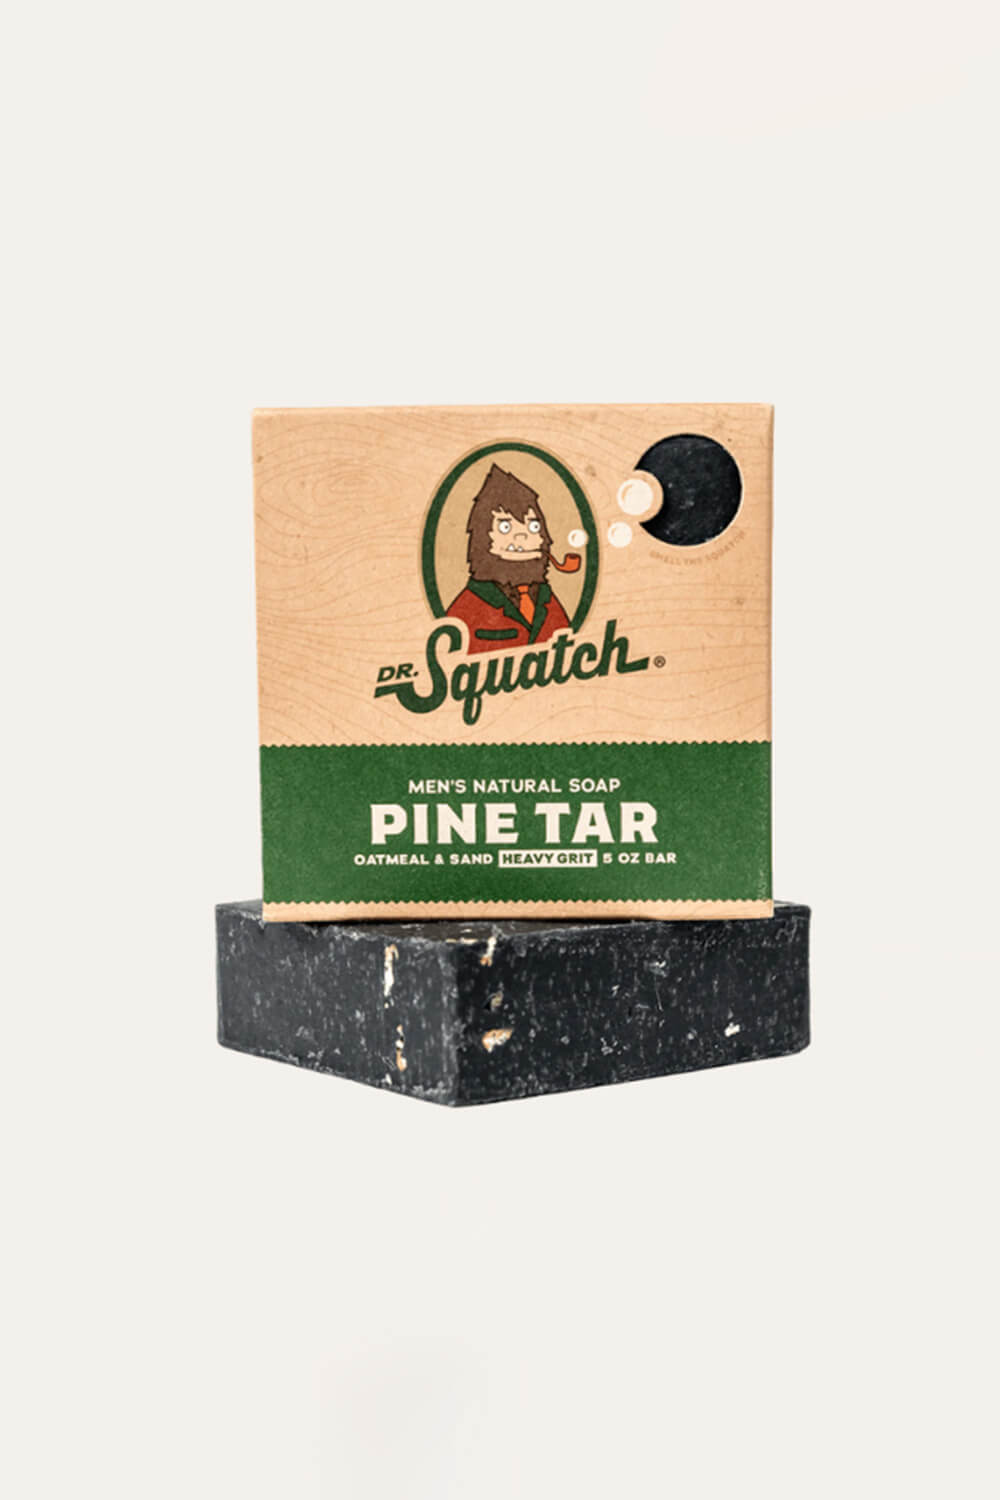 Dr. Squatch - Did you know that Pine Tar is our best